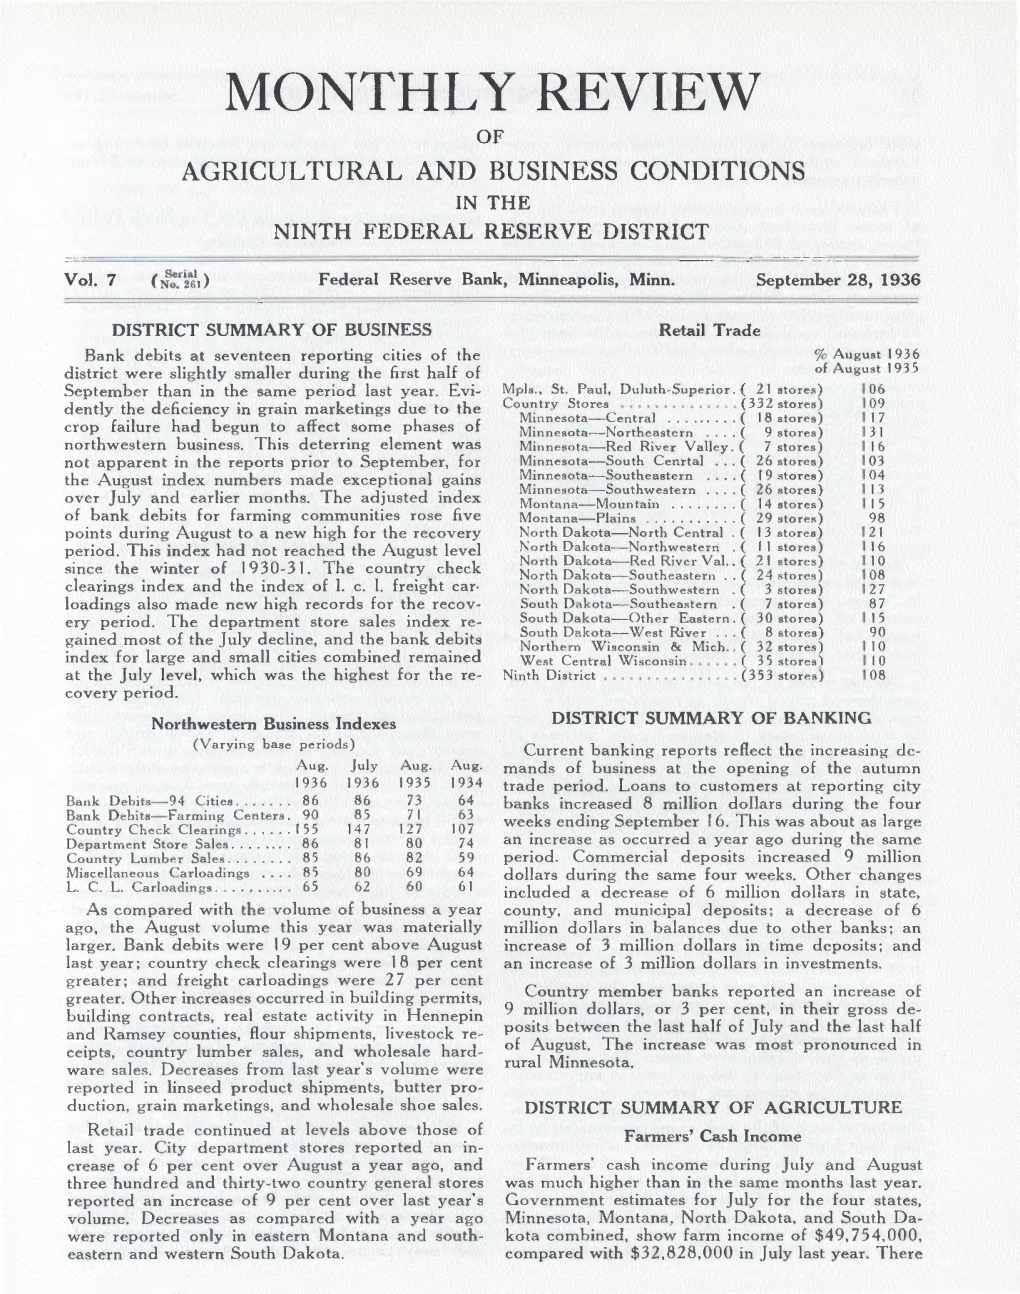 Monthly Review of Agricultural and Business Conditions in the Ninth Federal Reserve District